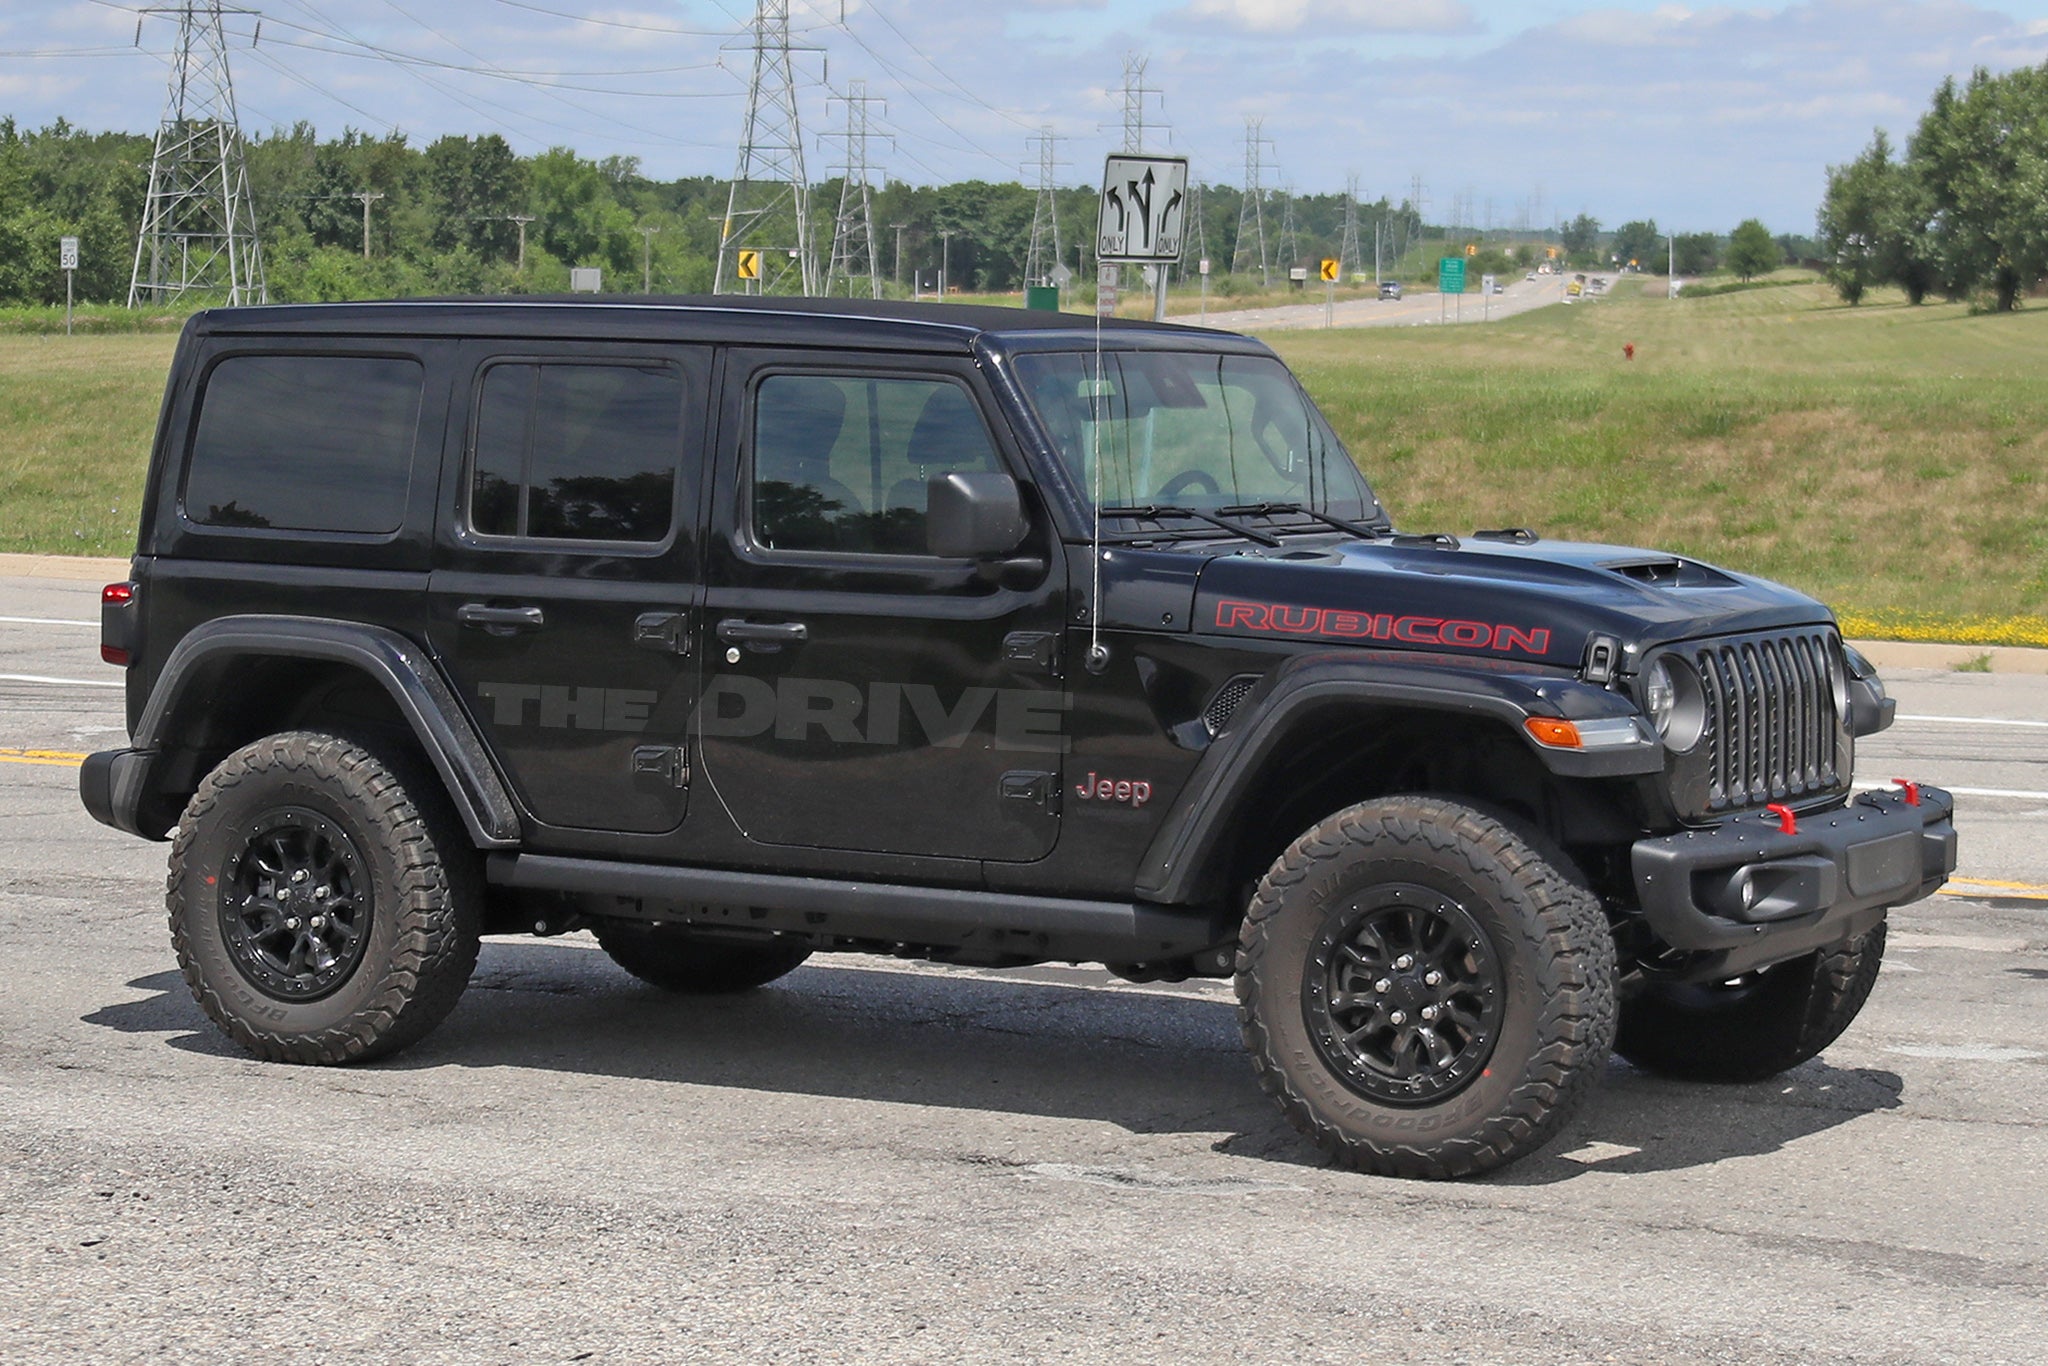 Here's the V8 Jeep Wrangler 392 Out Testing On Public Roads